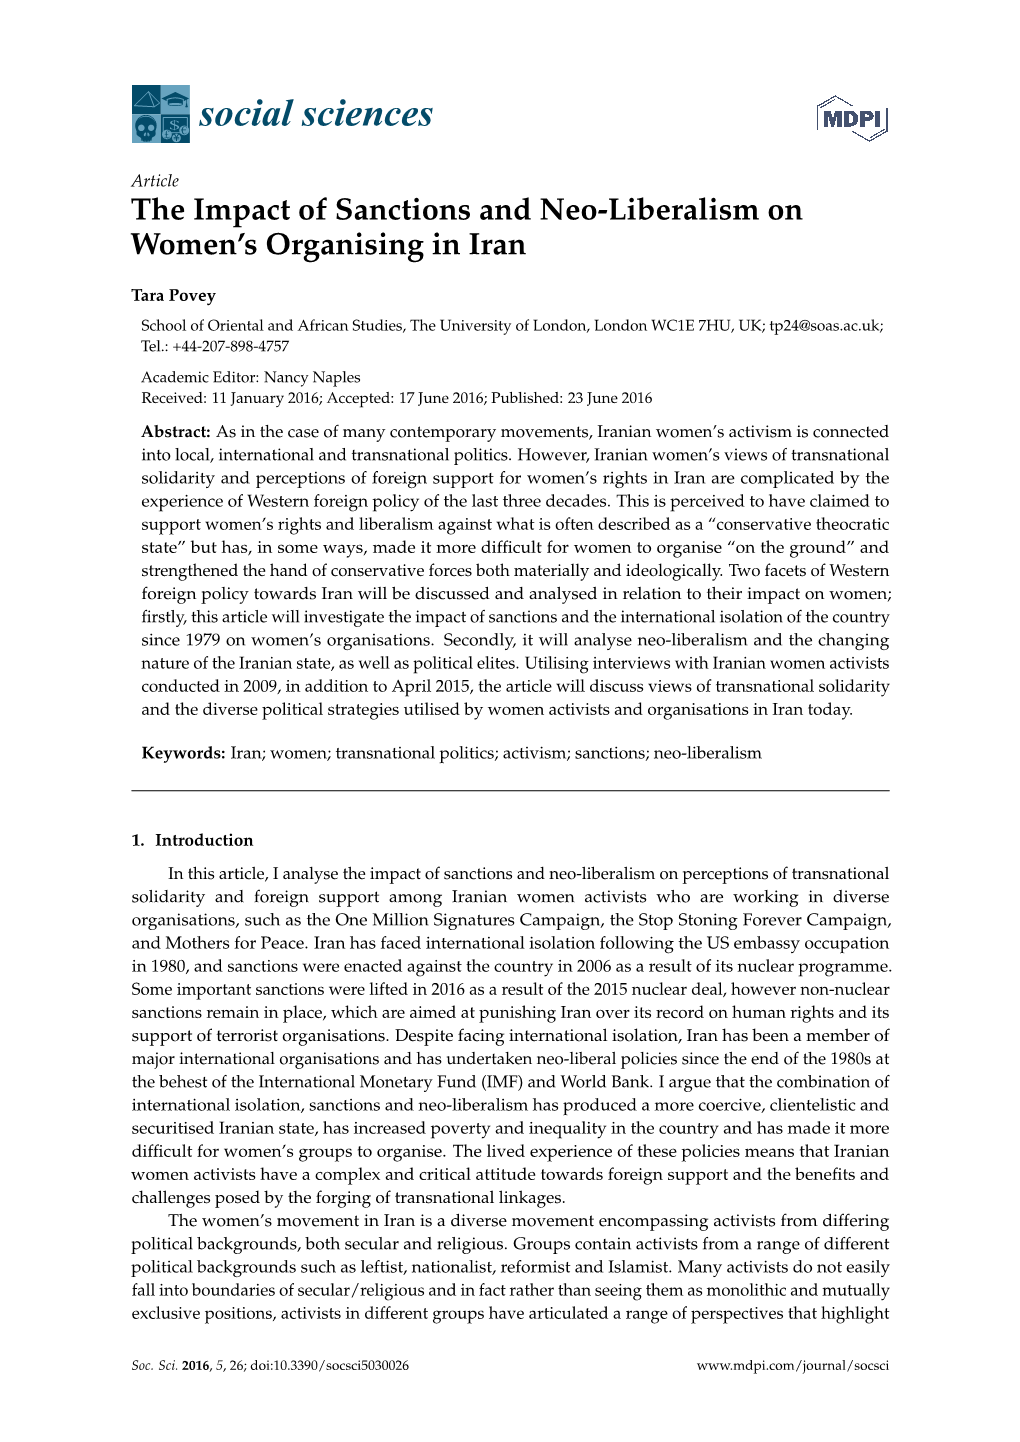 The Impact of Sanctions and Neo-Liberalism on Women's